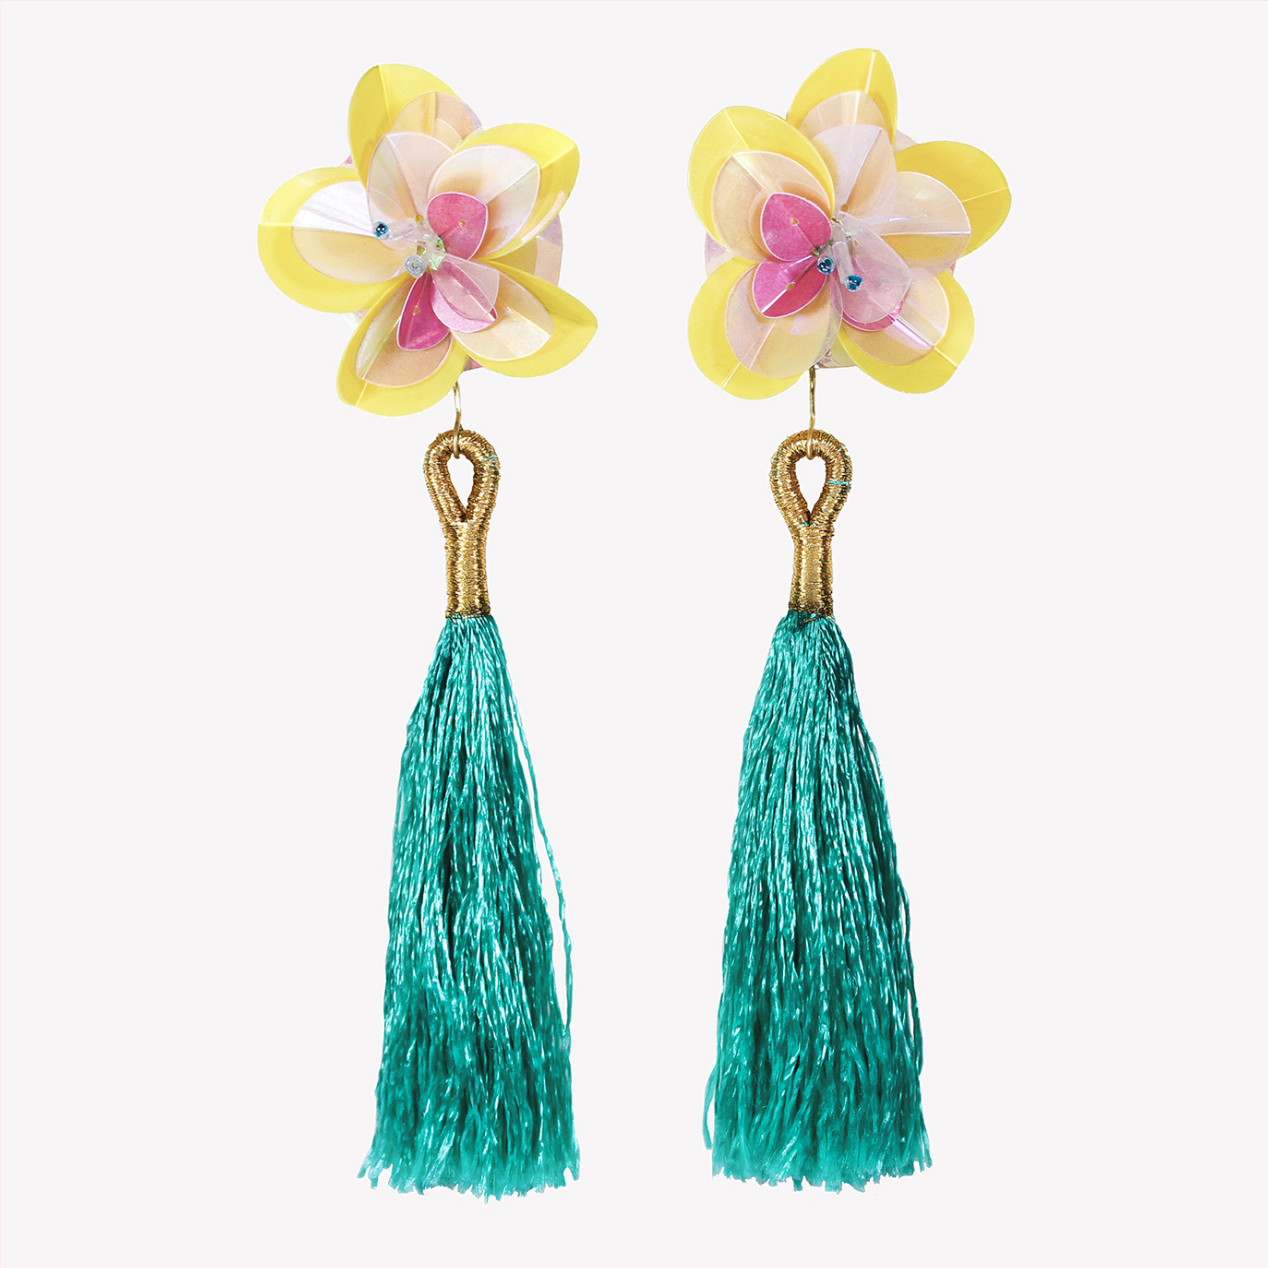 Large statement earrings with sequin flowers and tassels